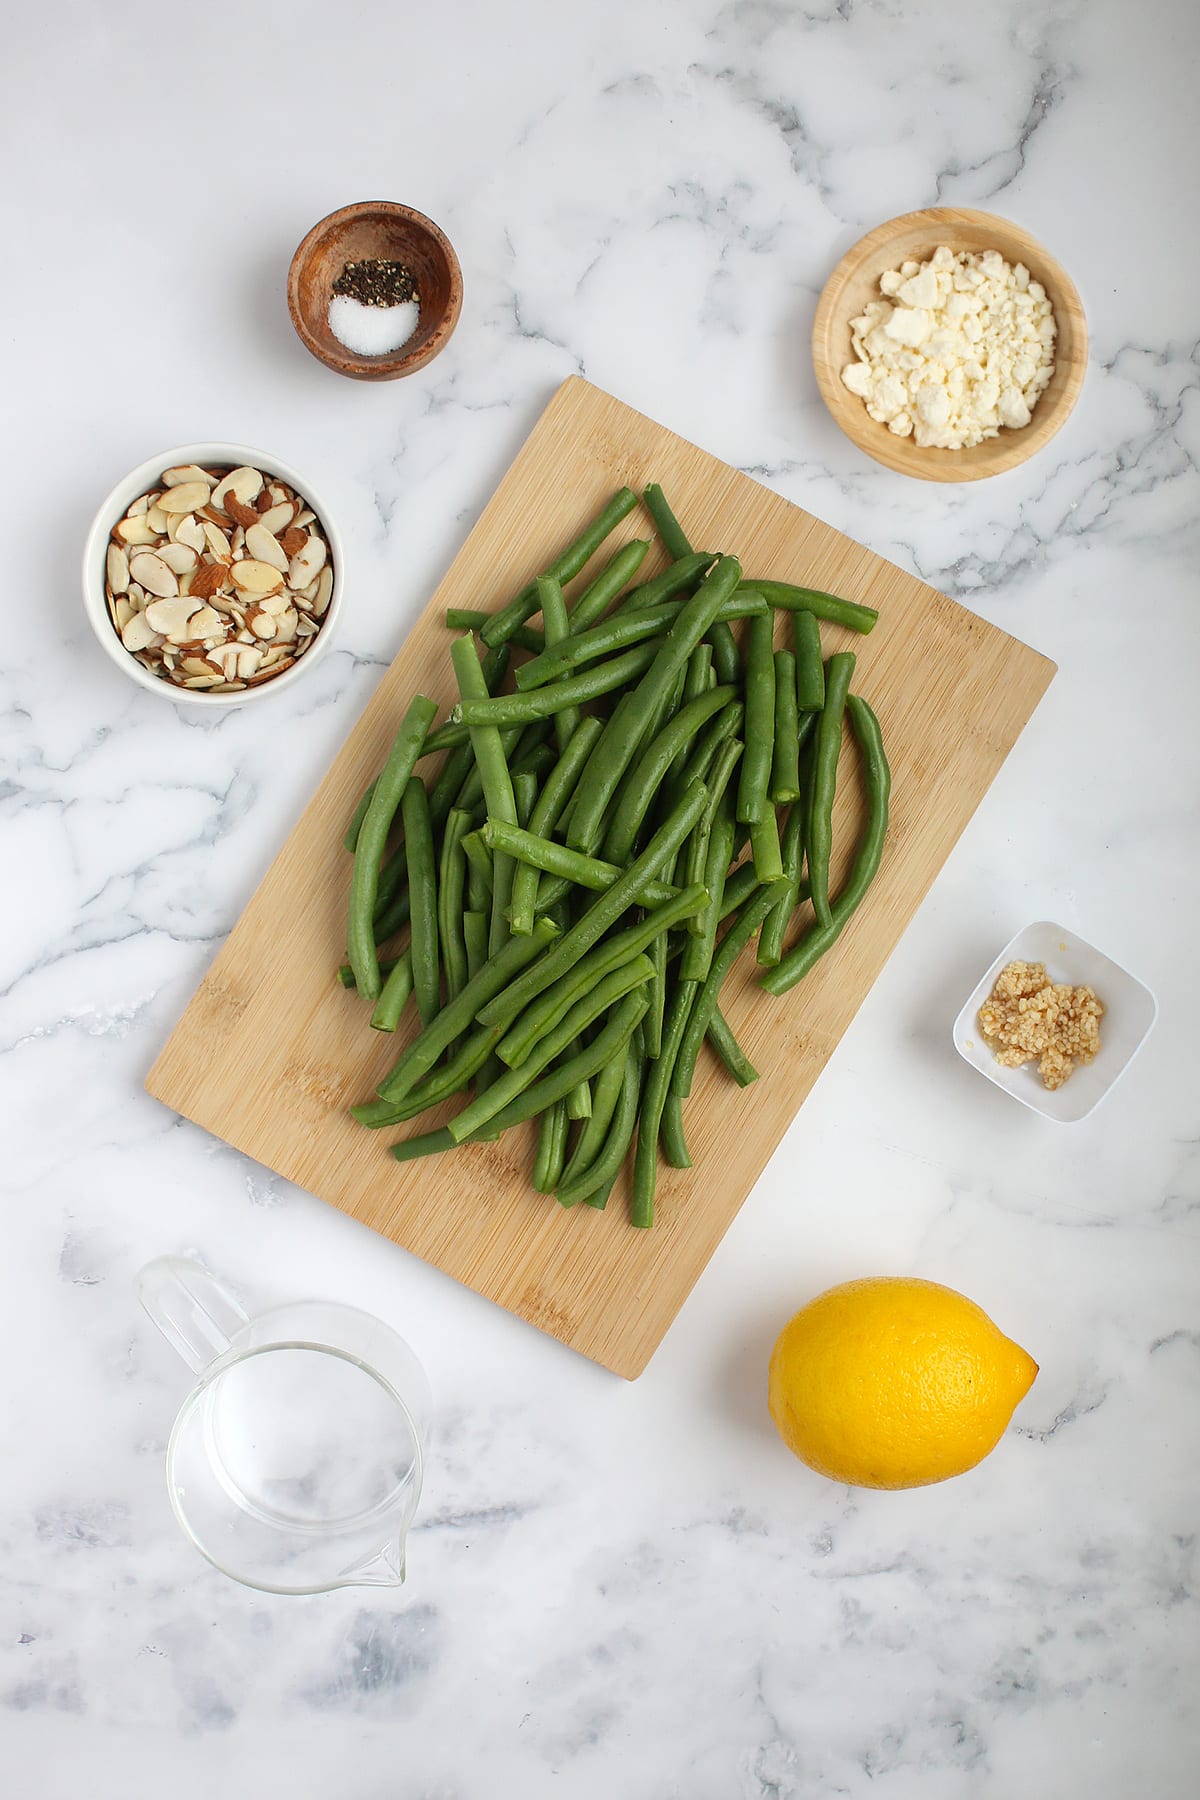 Ingredients you need for the fresh green bean salad.